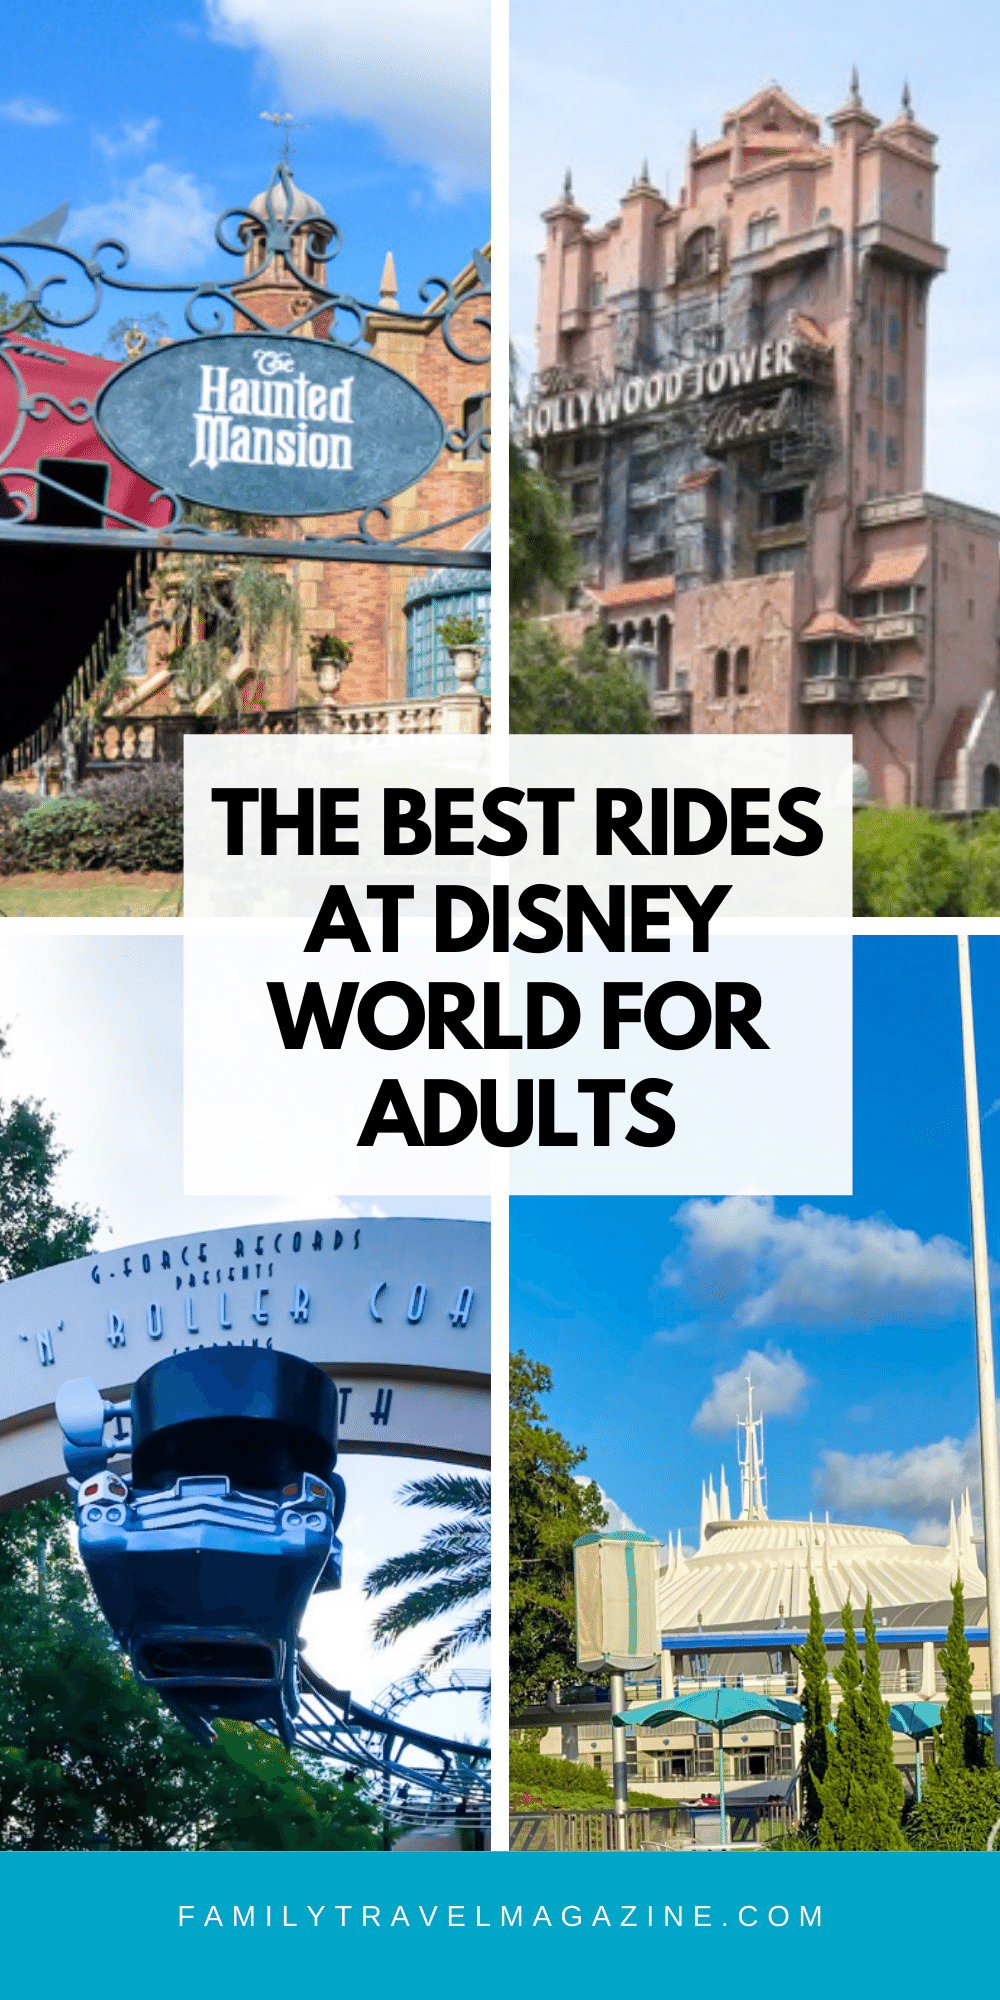 12 of the Best Rides at Disney World for Adults - Family Travel Magazine